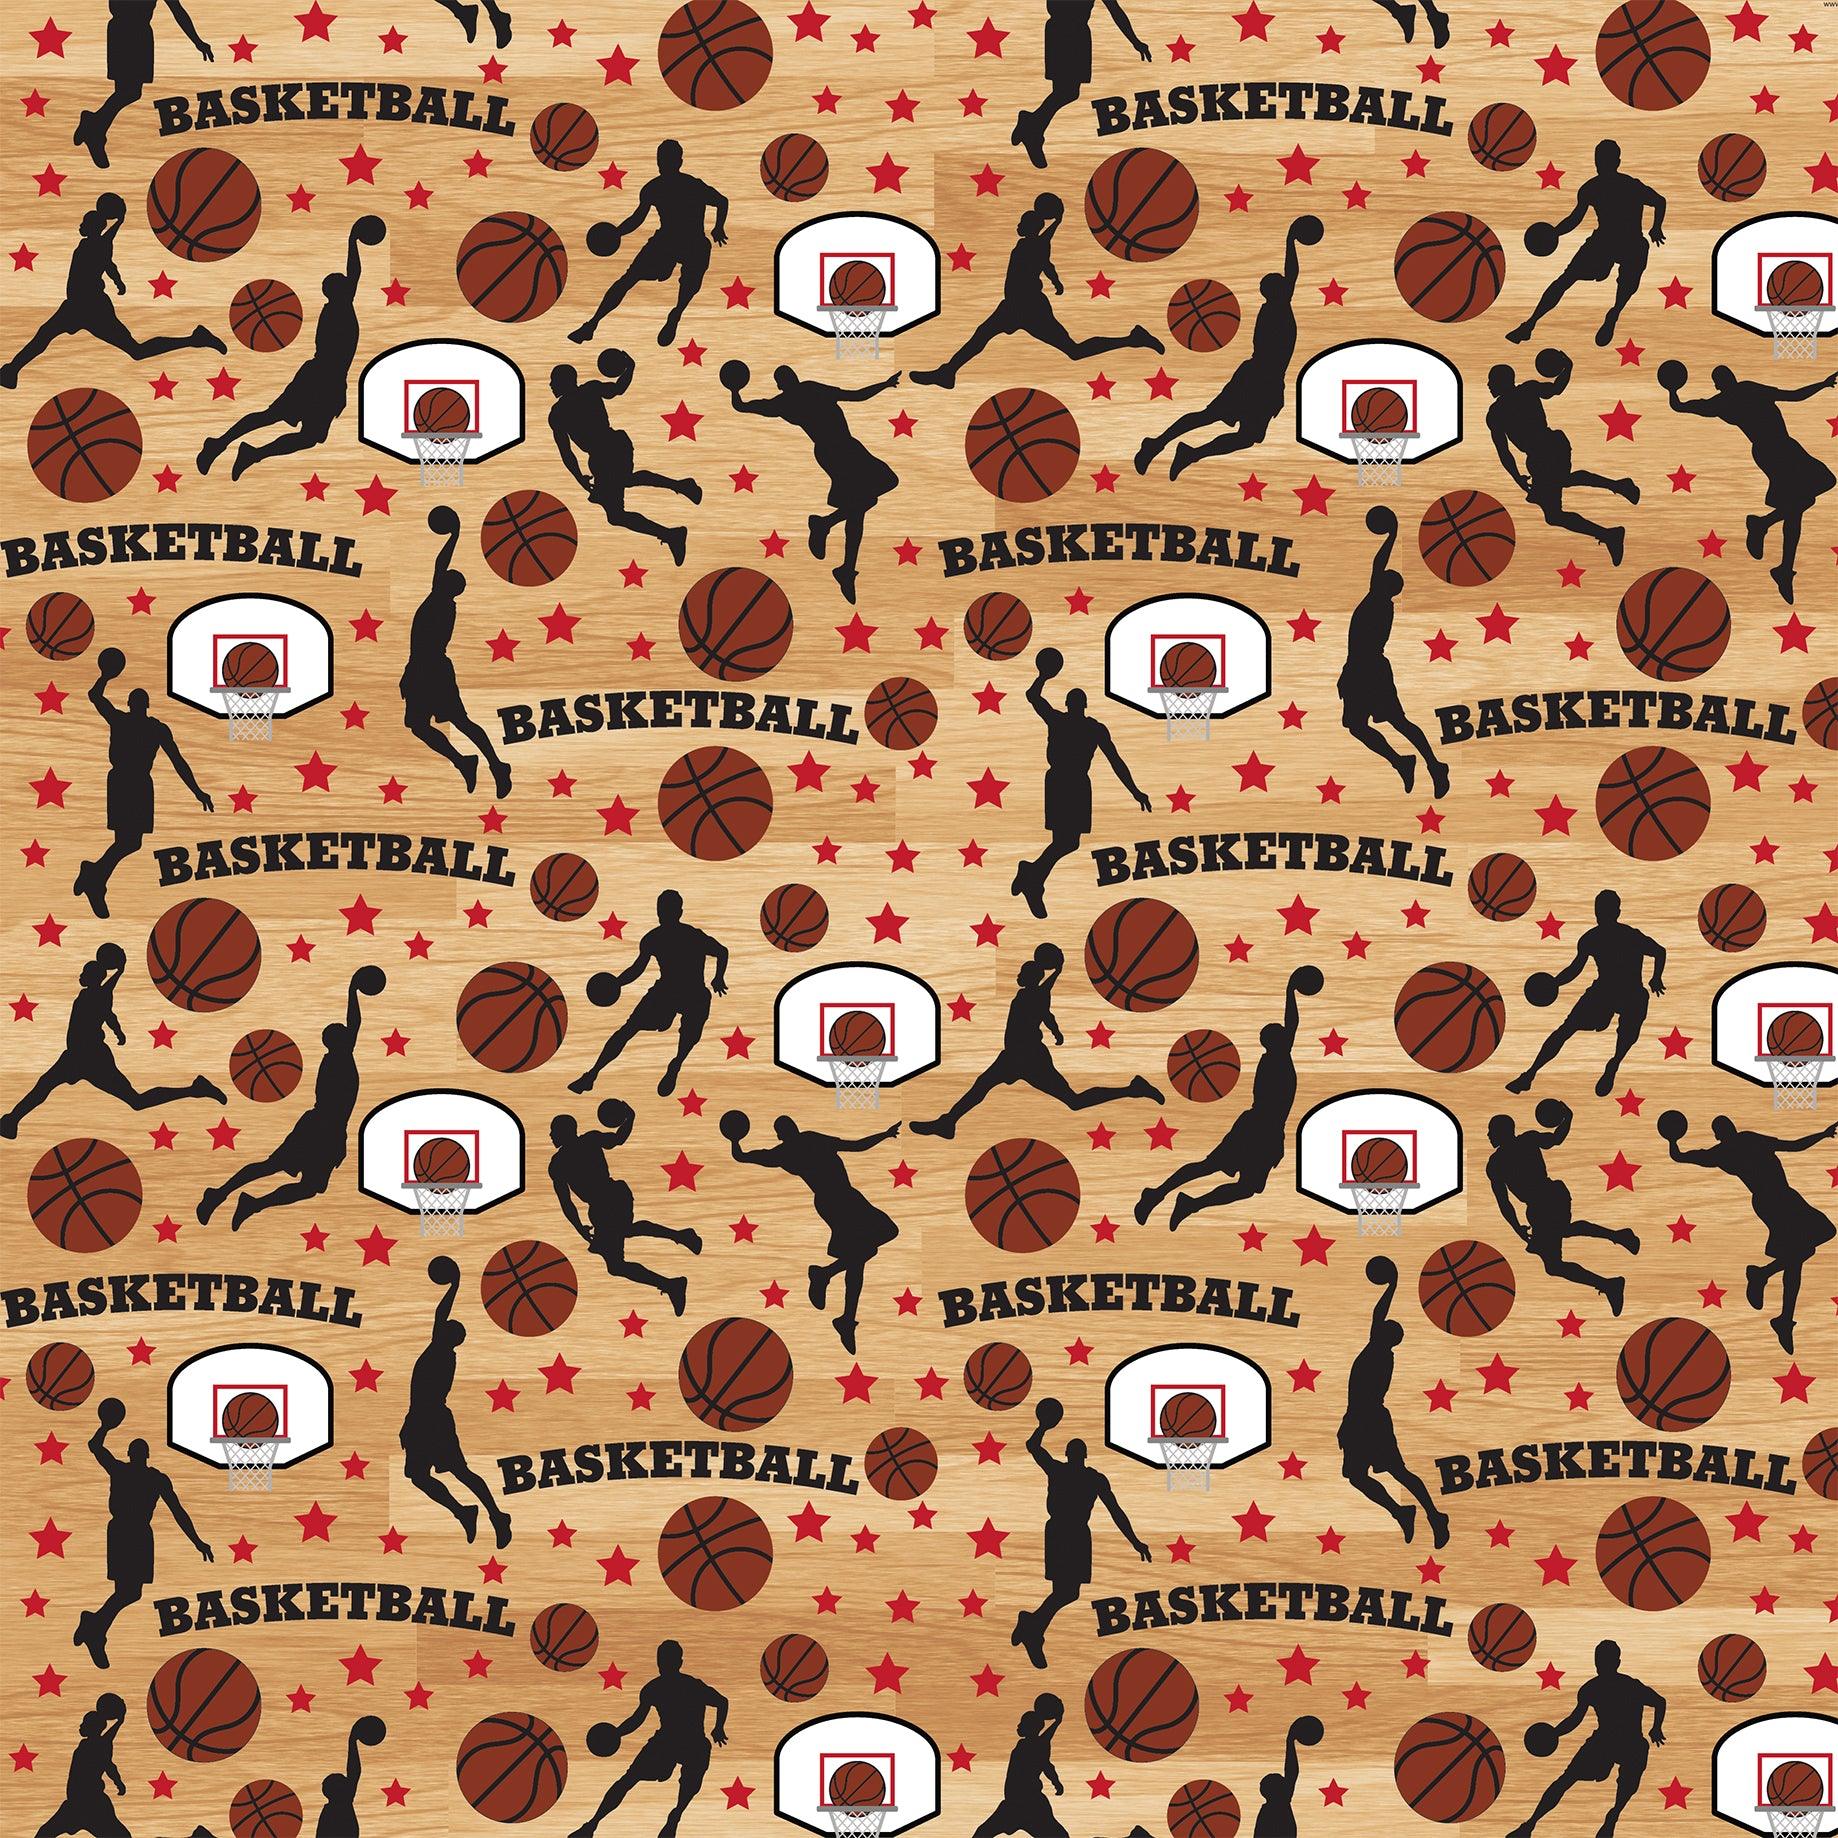 Basketball Collection Nothing But Net 12 x 12 Double-Sided Scrapbook Paper by Echo Park Paper - Scrapbook Supply Companies